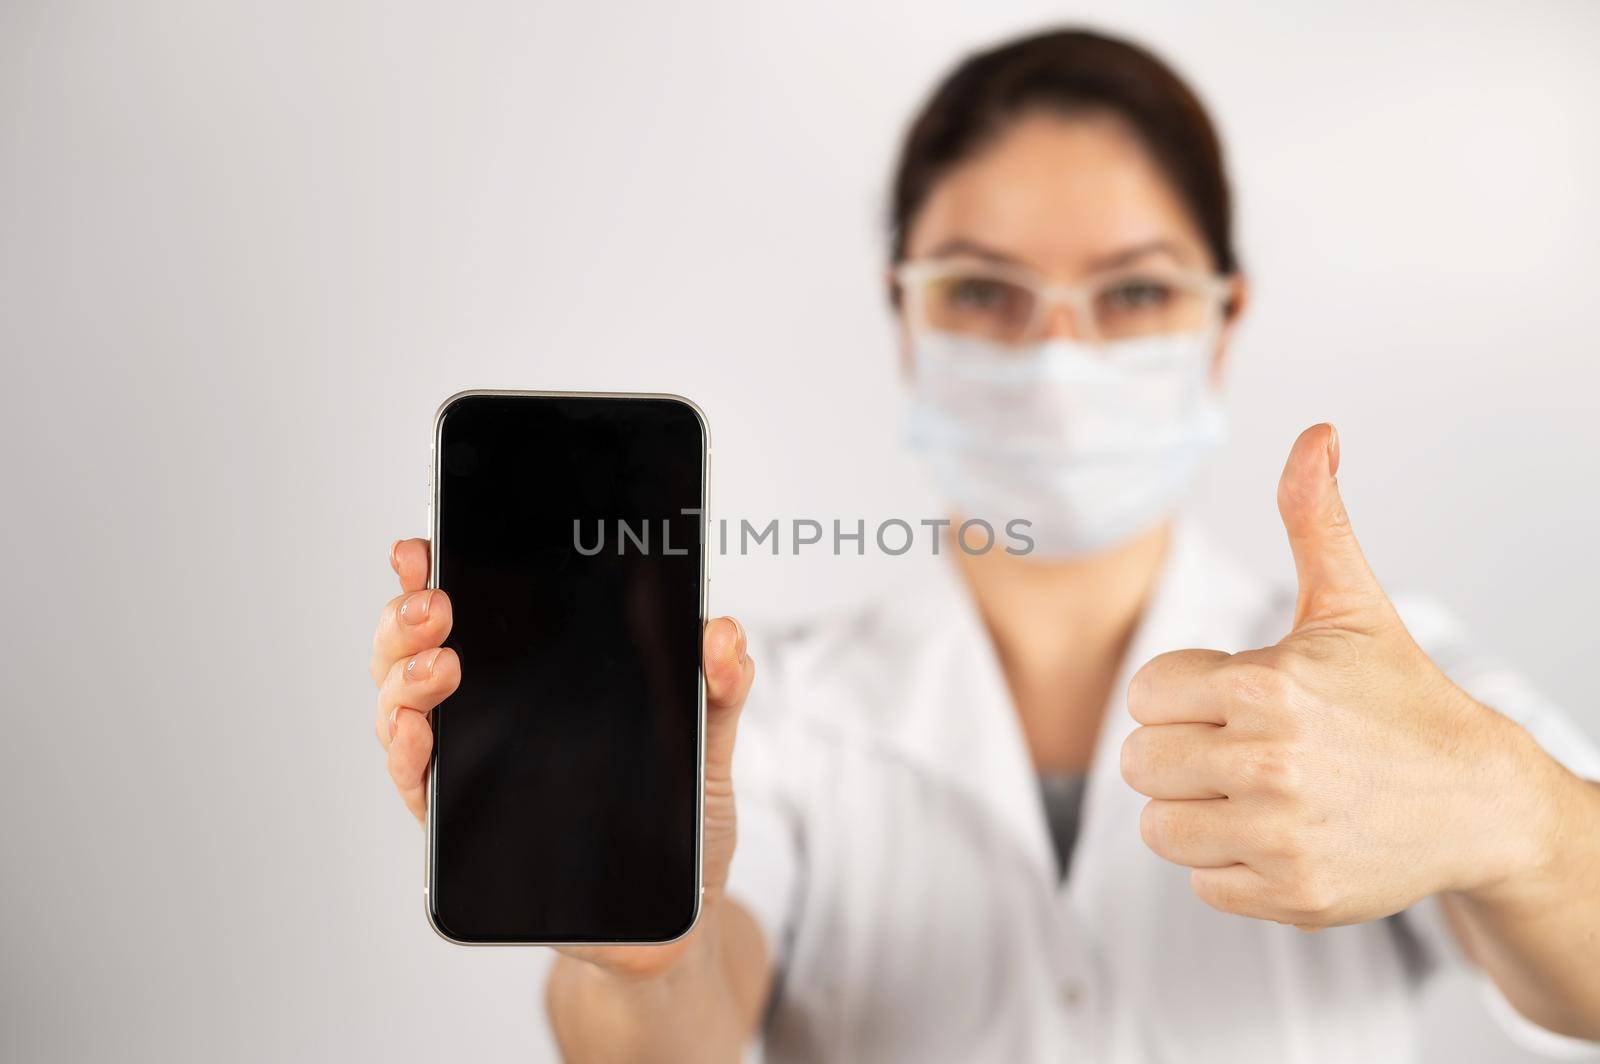 The doctor holds a smartphone with a black screen on a white background